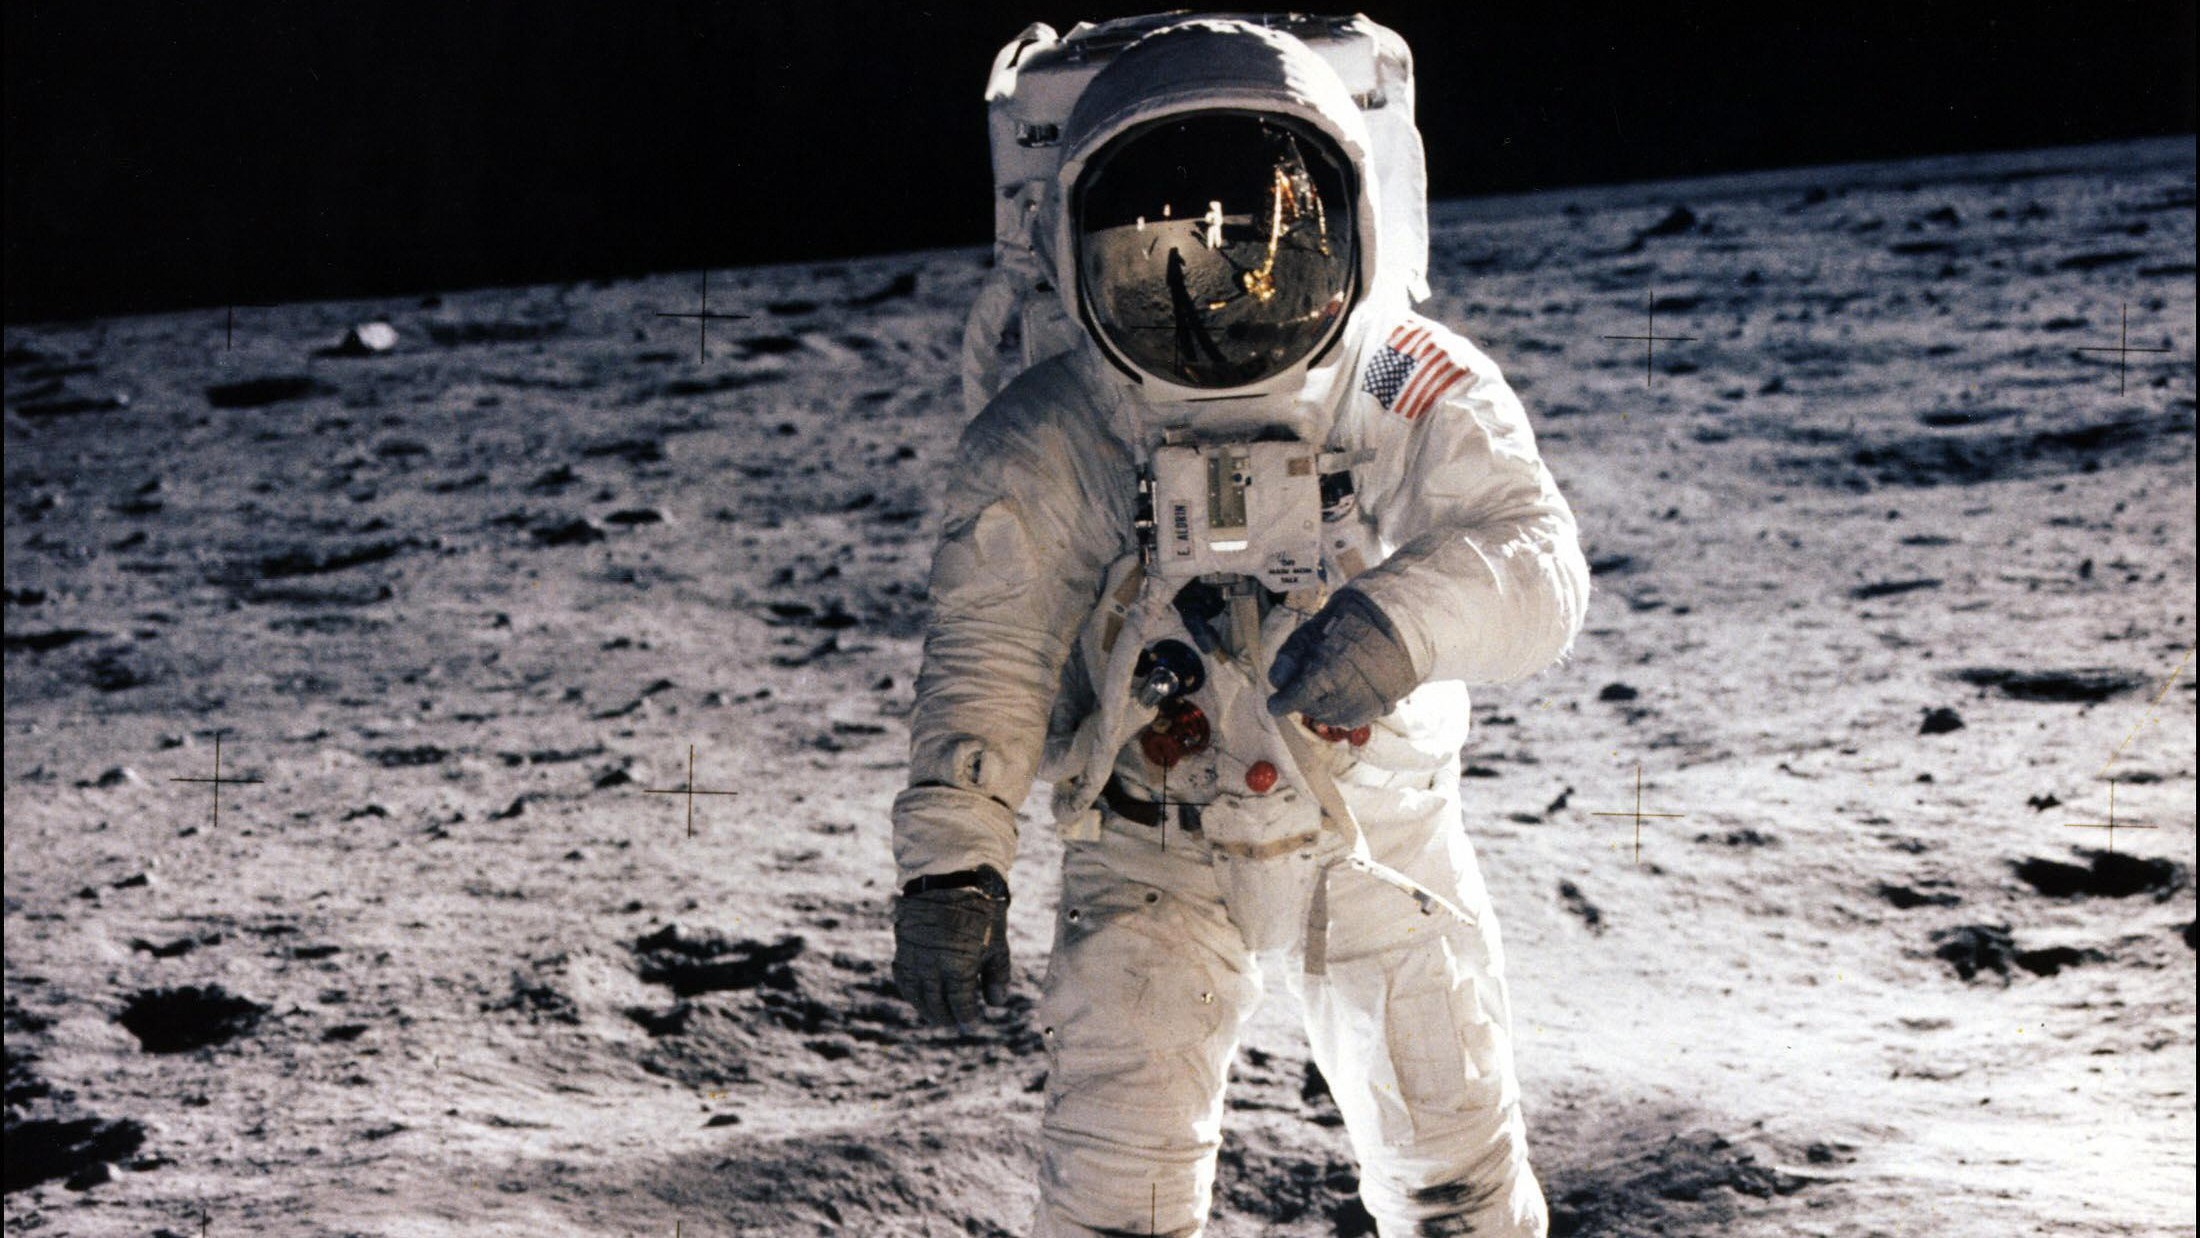 Astronaut Buzz Aldrin on the surface of the moon